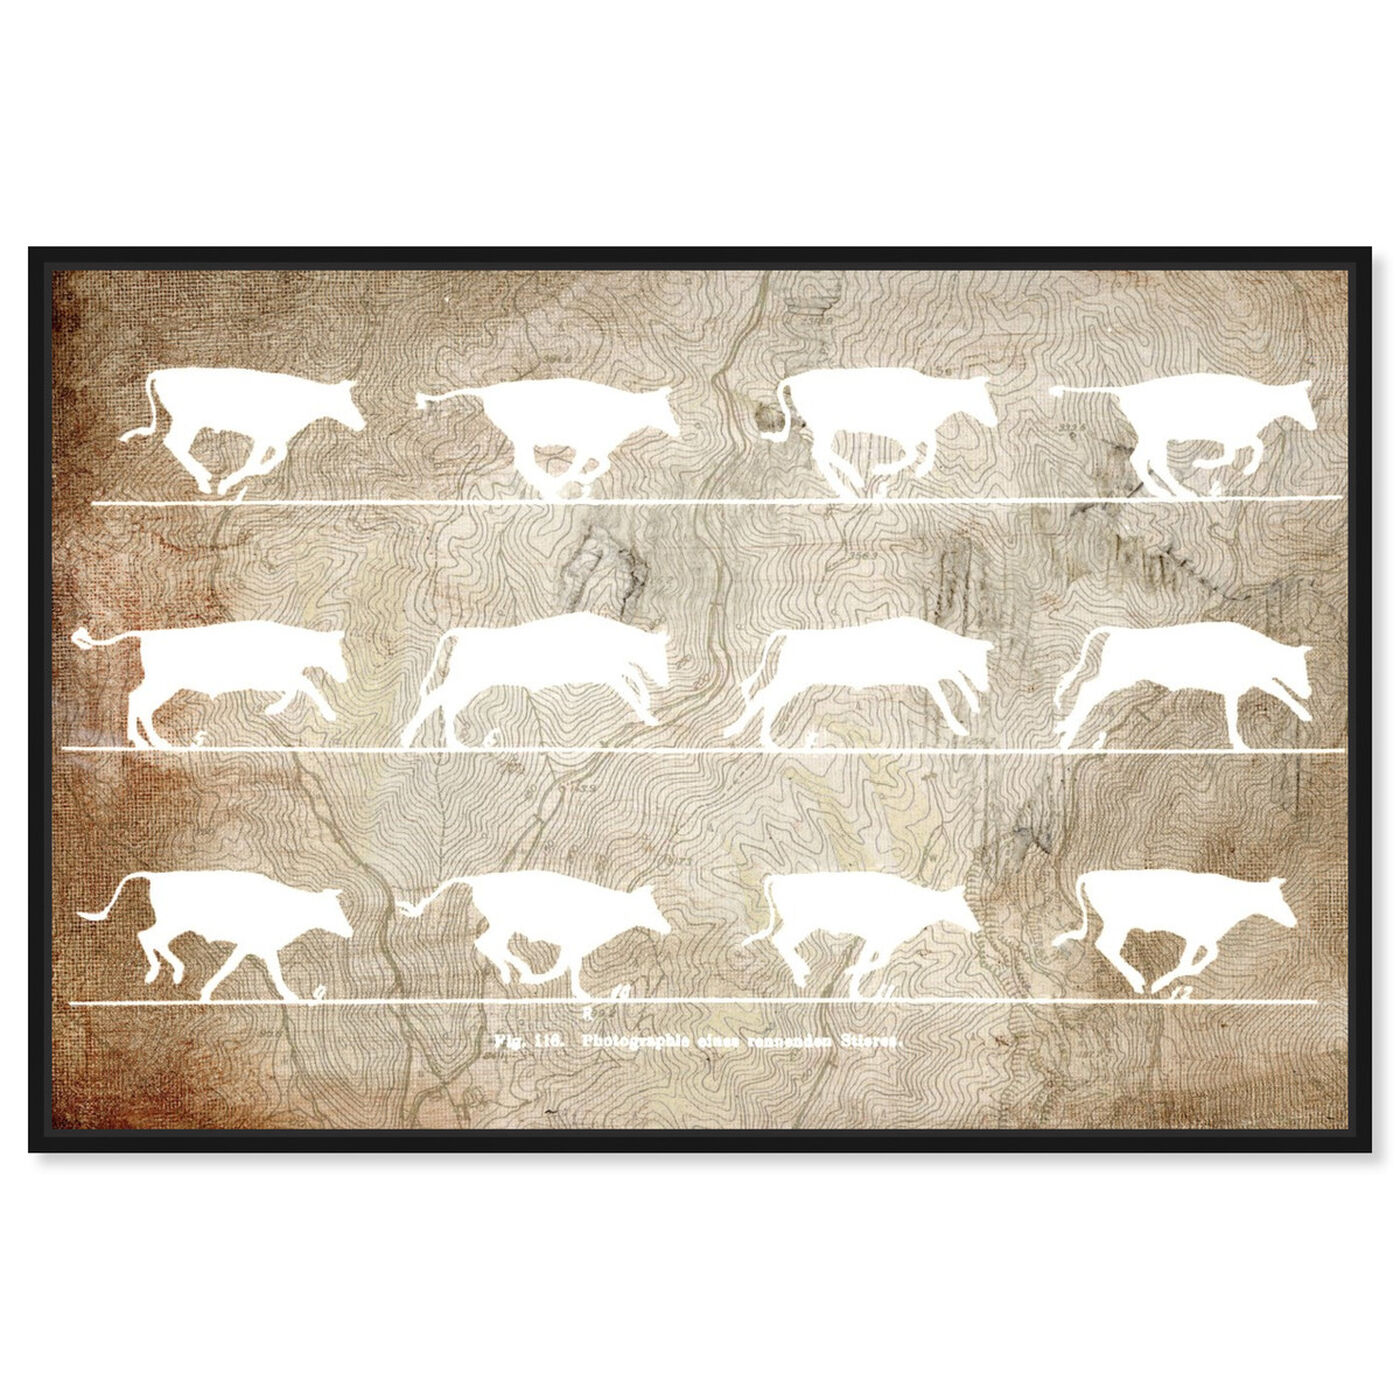 Front view of Cows in Motion featuring animals and farm animals art.